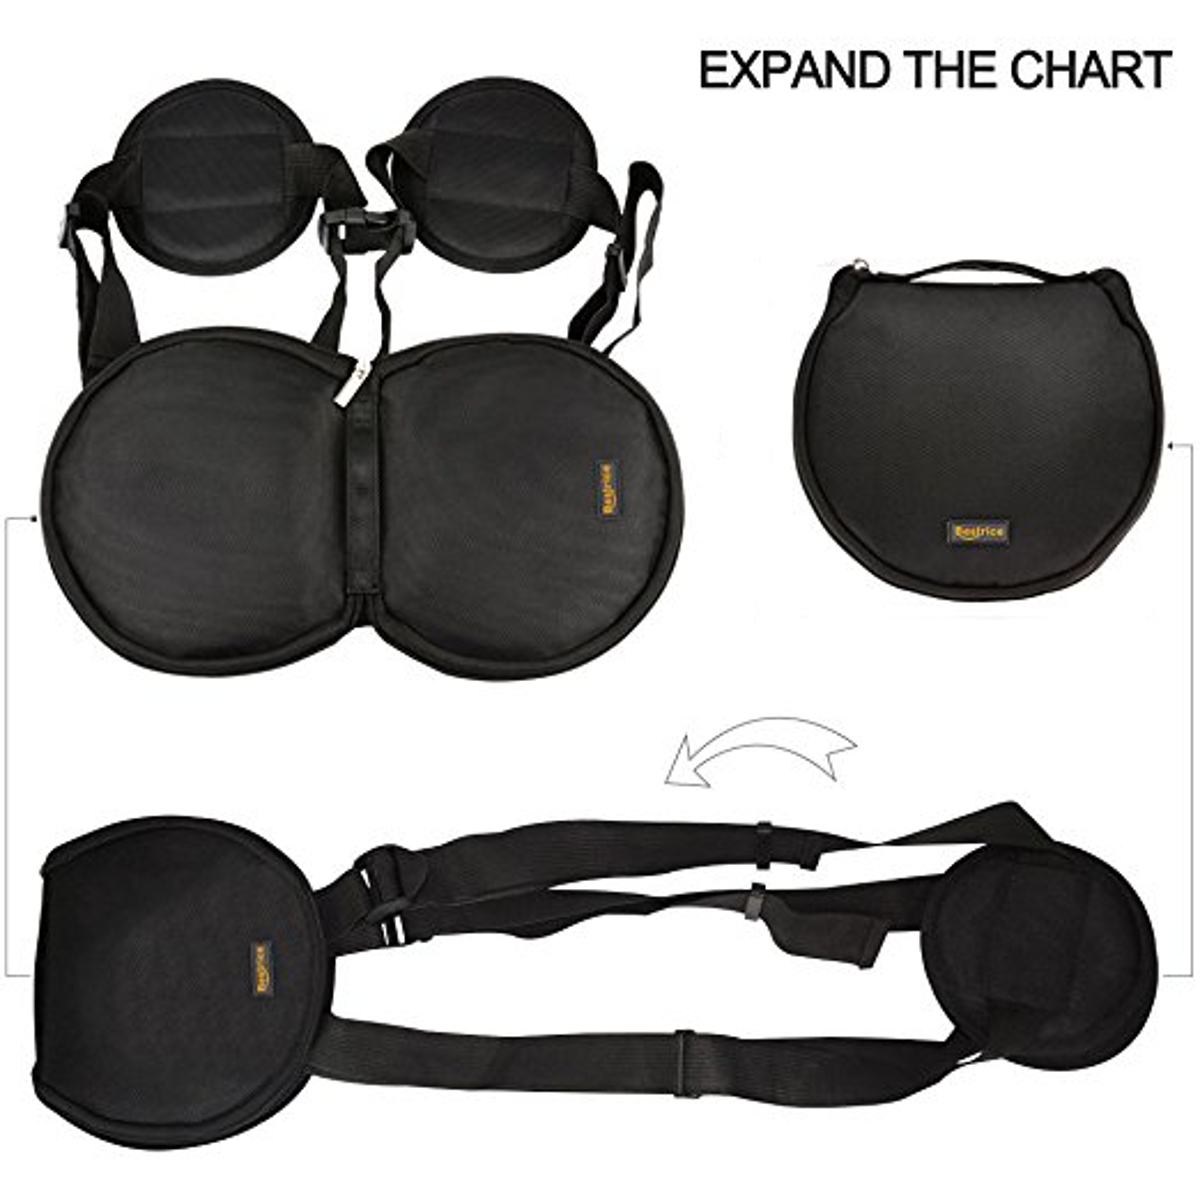 Adjustable-Waist-Protector-Portable-Back-Support-Belt-Pad-Posture-Corrector-Support-Pad-Pain-Relief-1215035